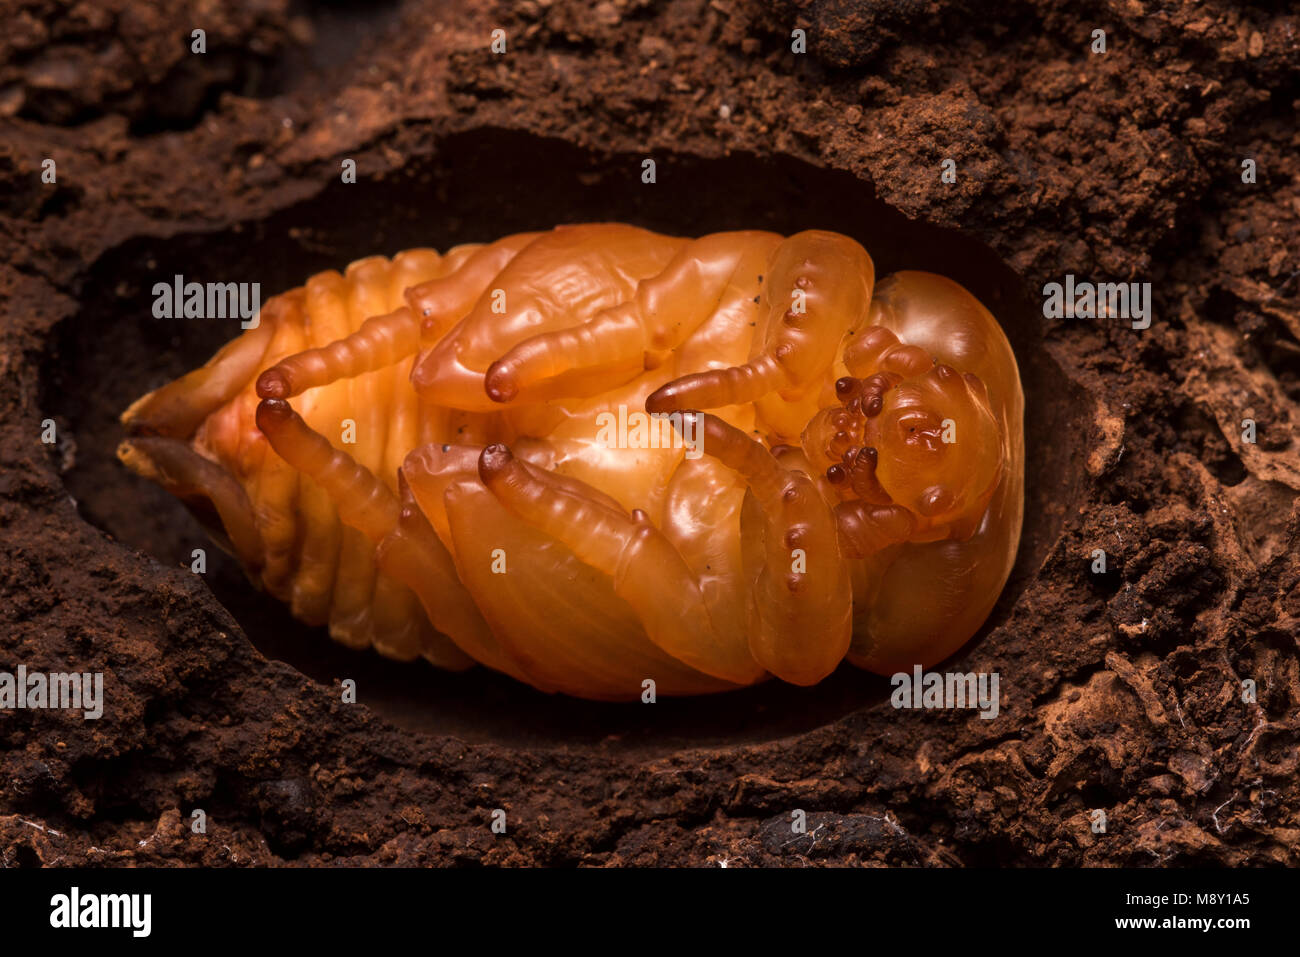 A beetle undergoing metamorphosis, probably a species from the Scarabaeidae family. Stock Photo